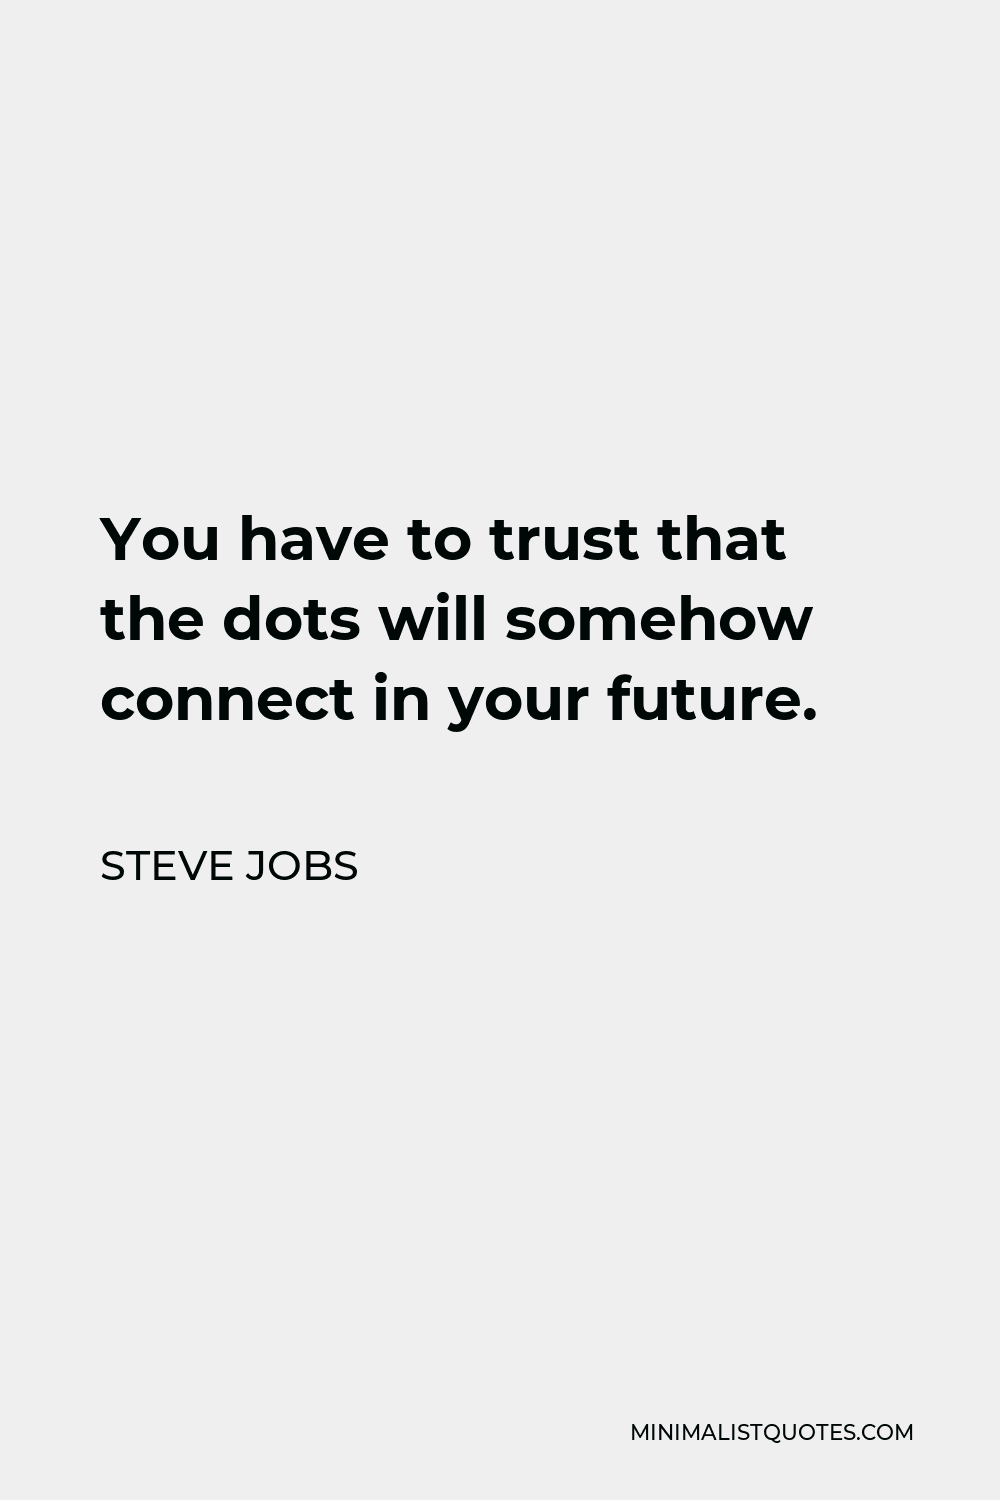 Steve Jobs Quote - You have to trust that the dots will somehow connect in your future.